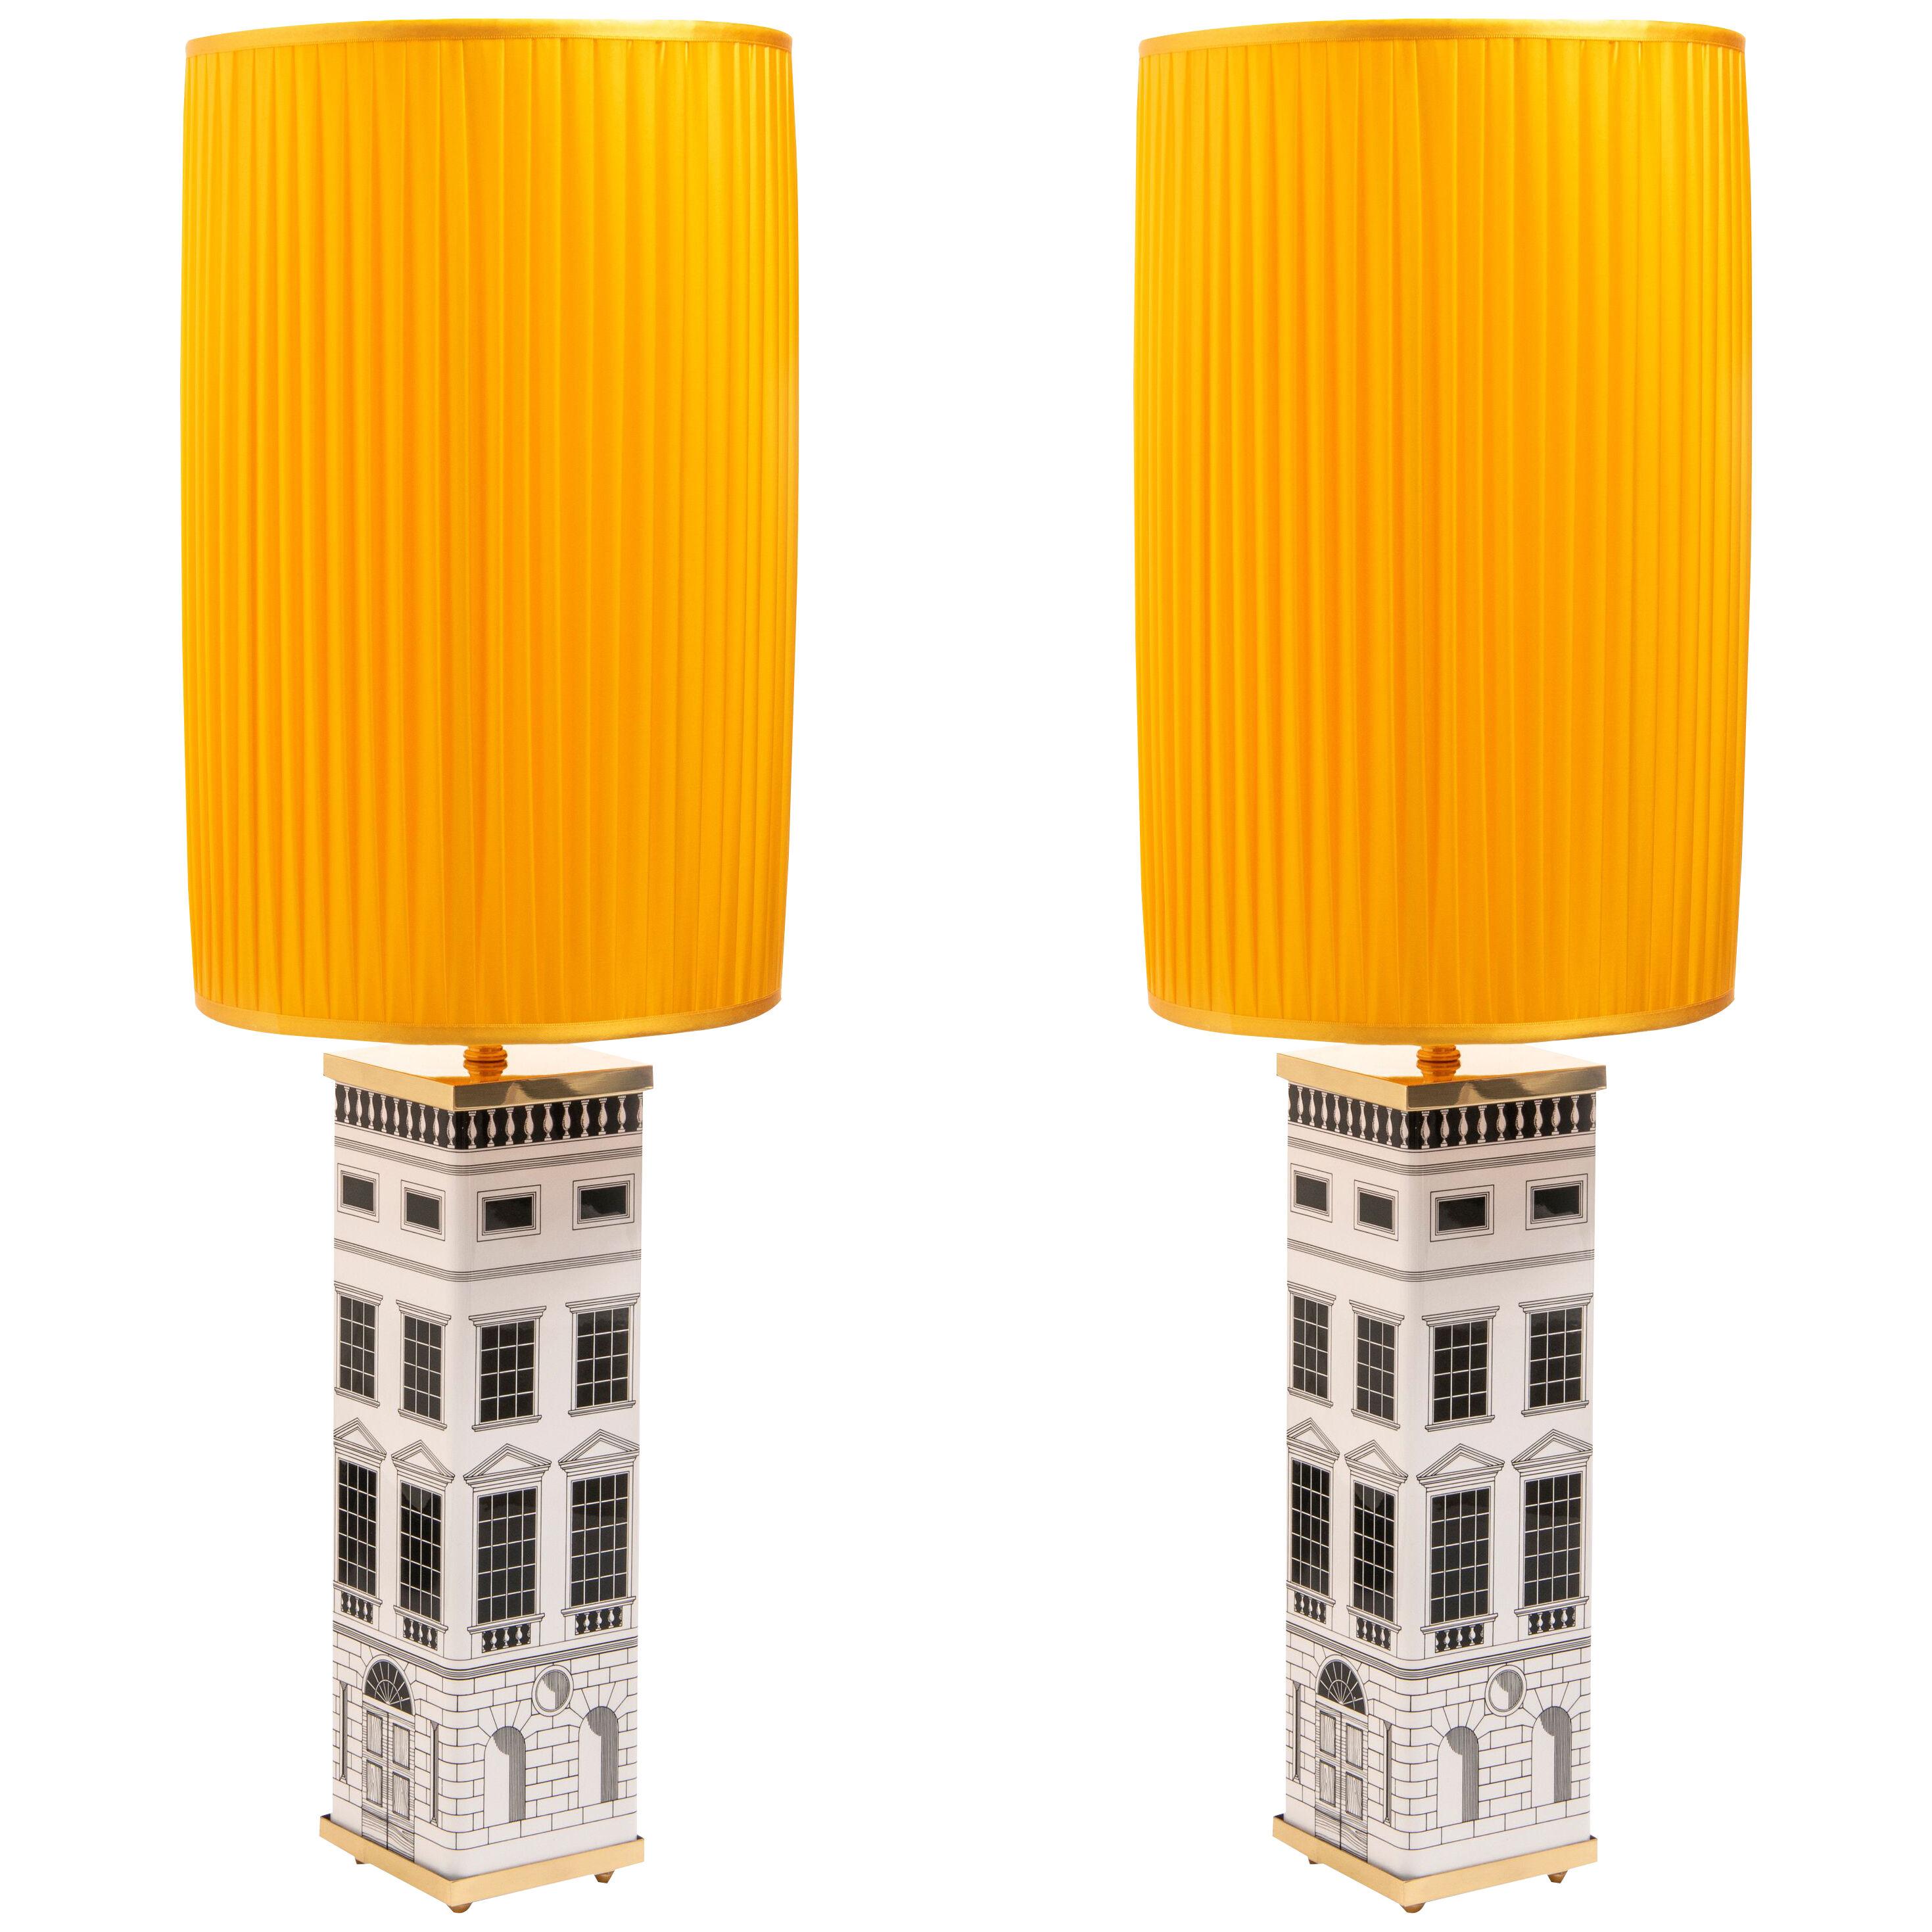 Pair of Black and white Architecturra Table lights by Fornasetti, Italy 2020